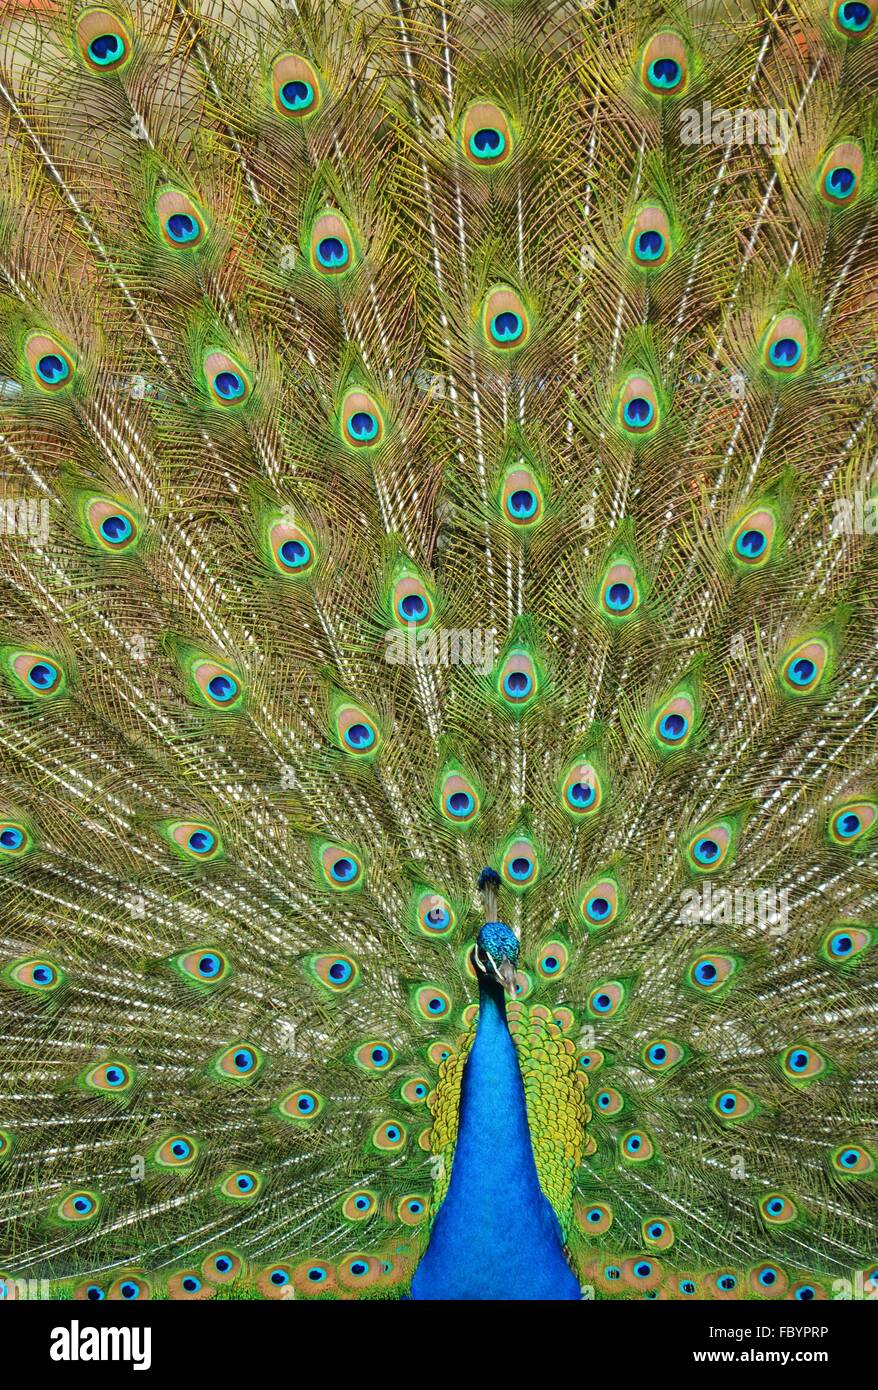 Peacock with Tailfeathers Extended Stock Photo